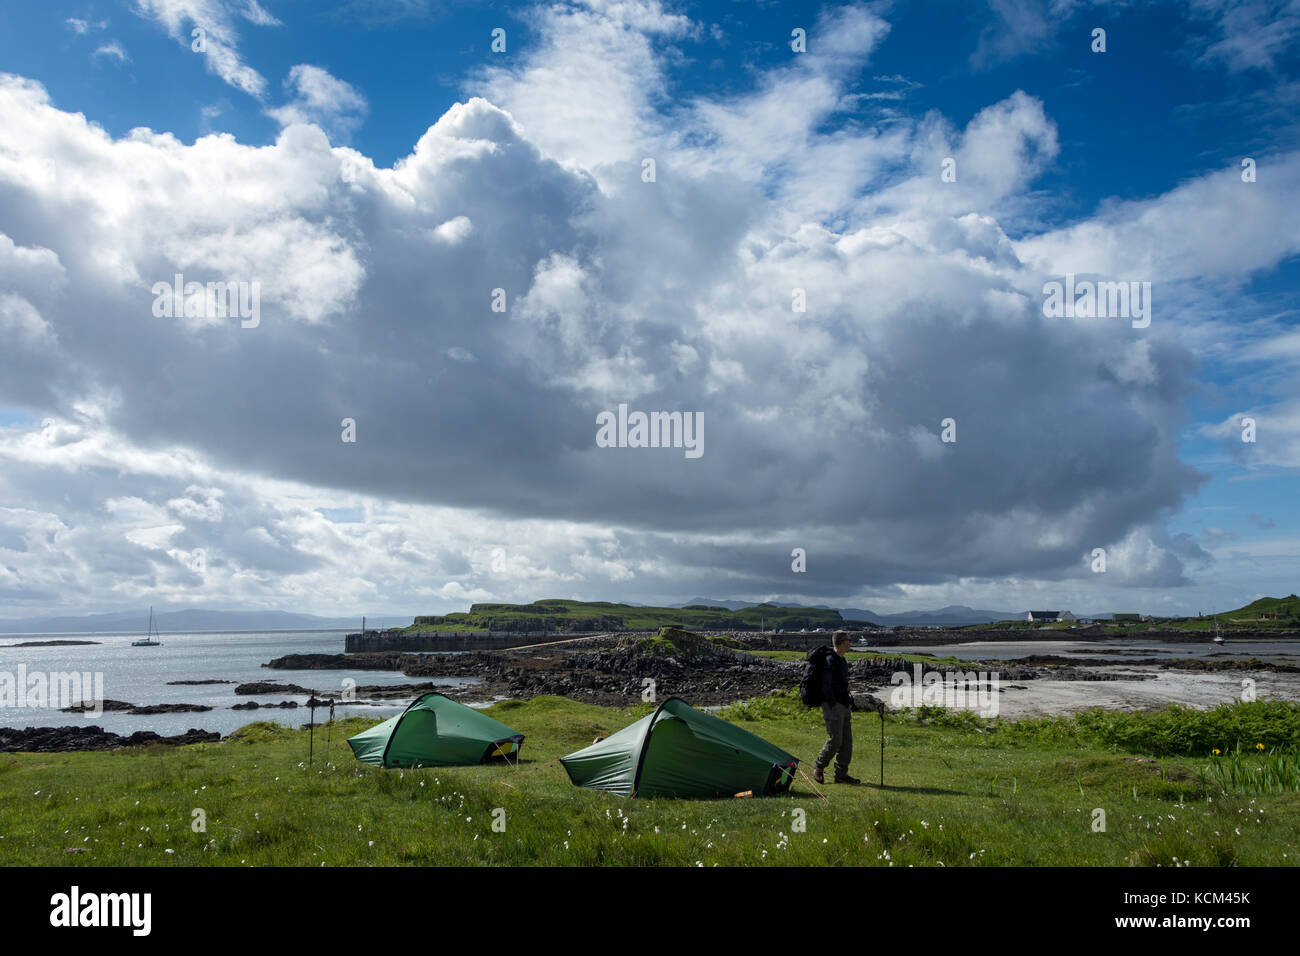 Two small Hilleberg Akto tents on the camping area at Galmisdale Bay on the Isle of Eigg, Scotland, UK Stock Photo